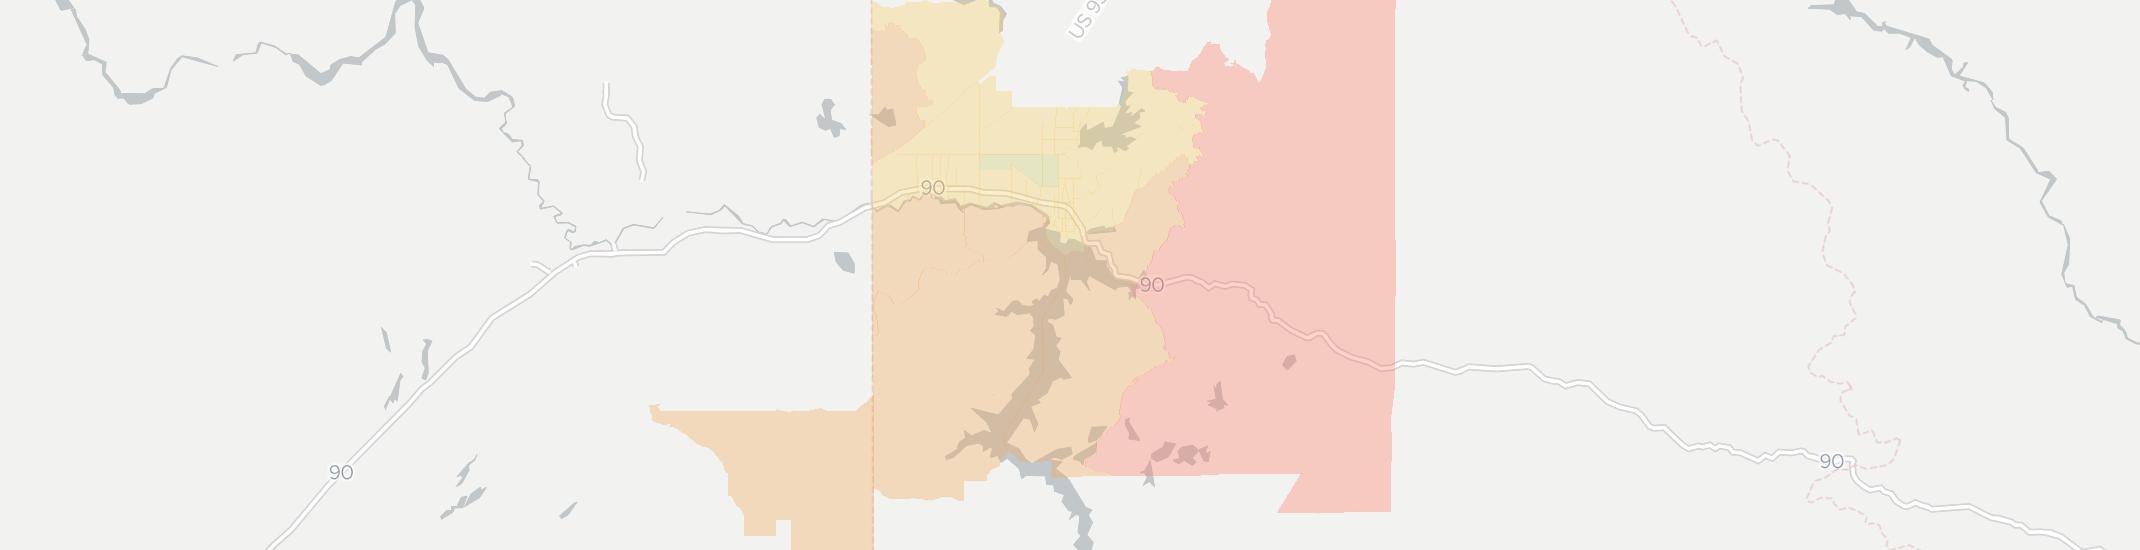 Coeur D Alene Internet Competition Map. Click for interactive map.